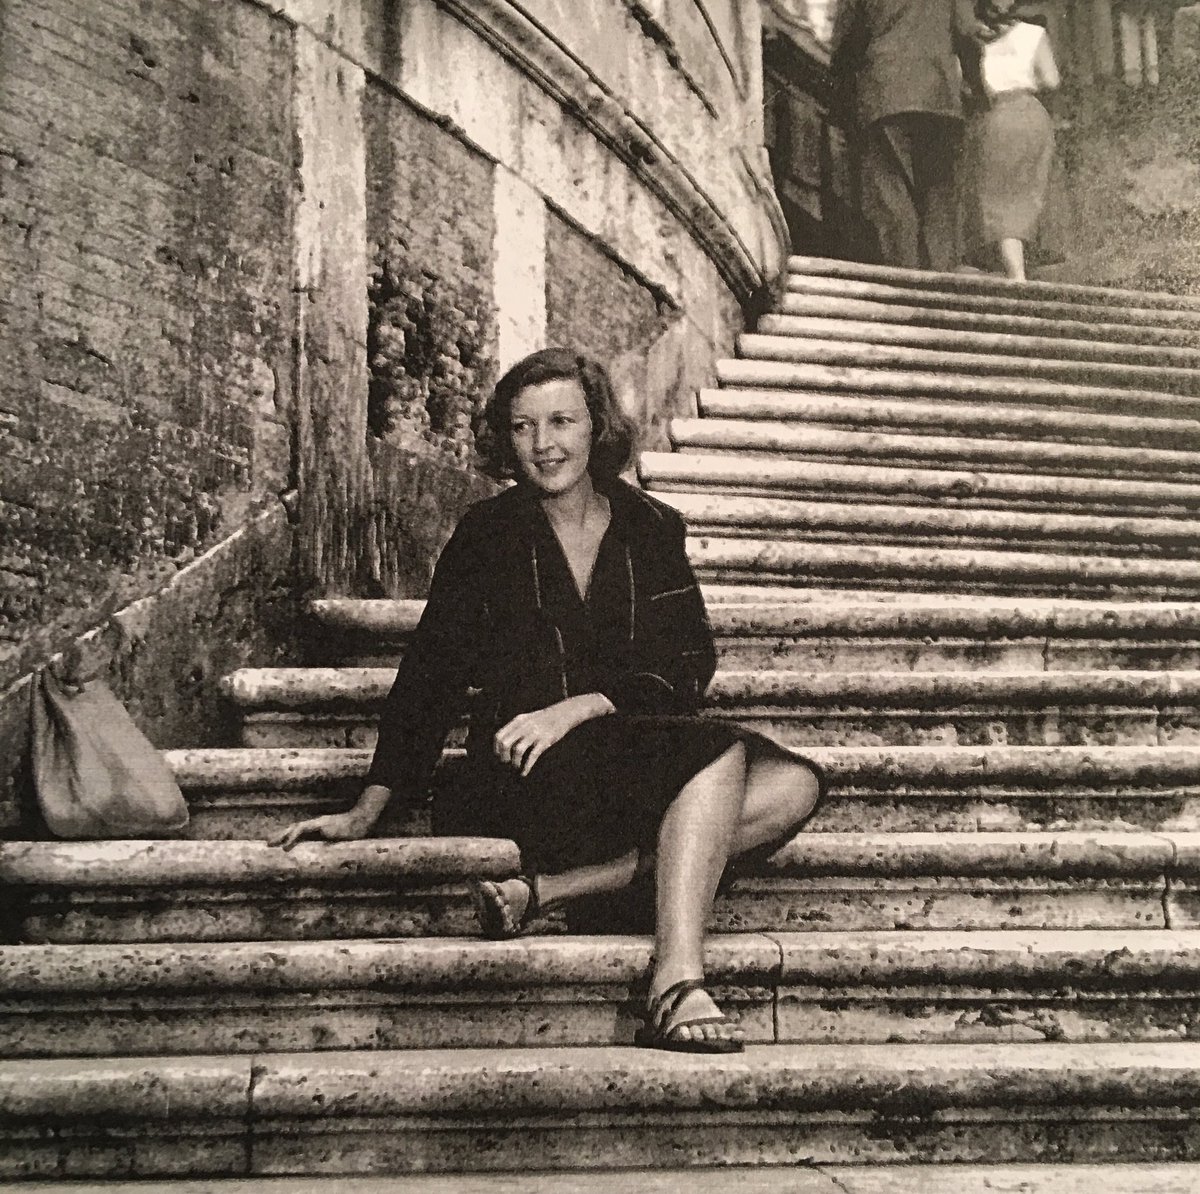 Martha  #Gellhorn went to Spain in March 1937 as “an act of solidarity” because Spaniards were “standing up to Hitler via Franco.” She “didn’t go to write;” she went to BE there. David Seymour